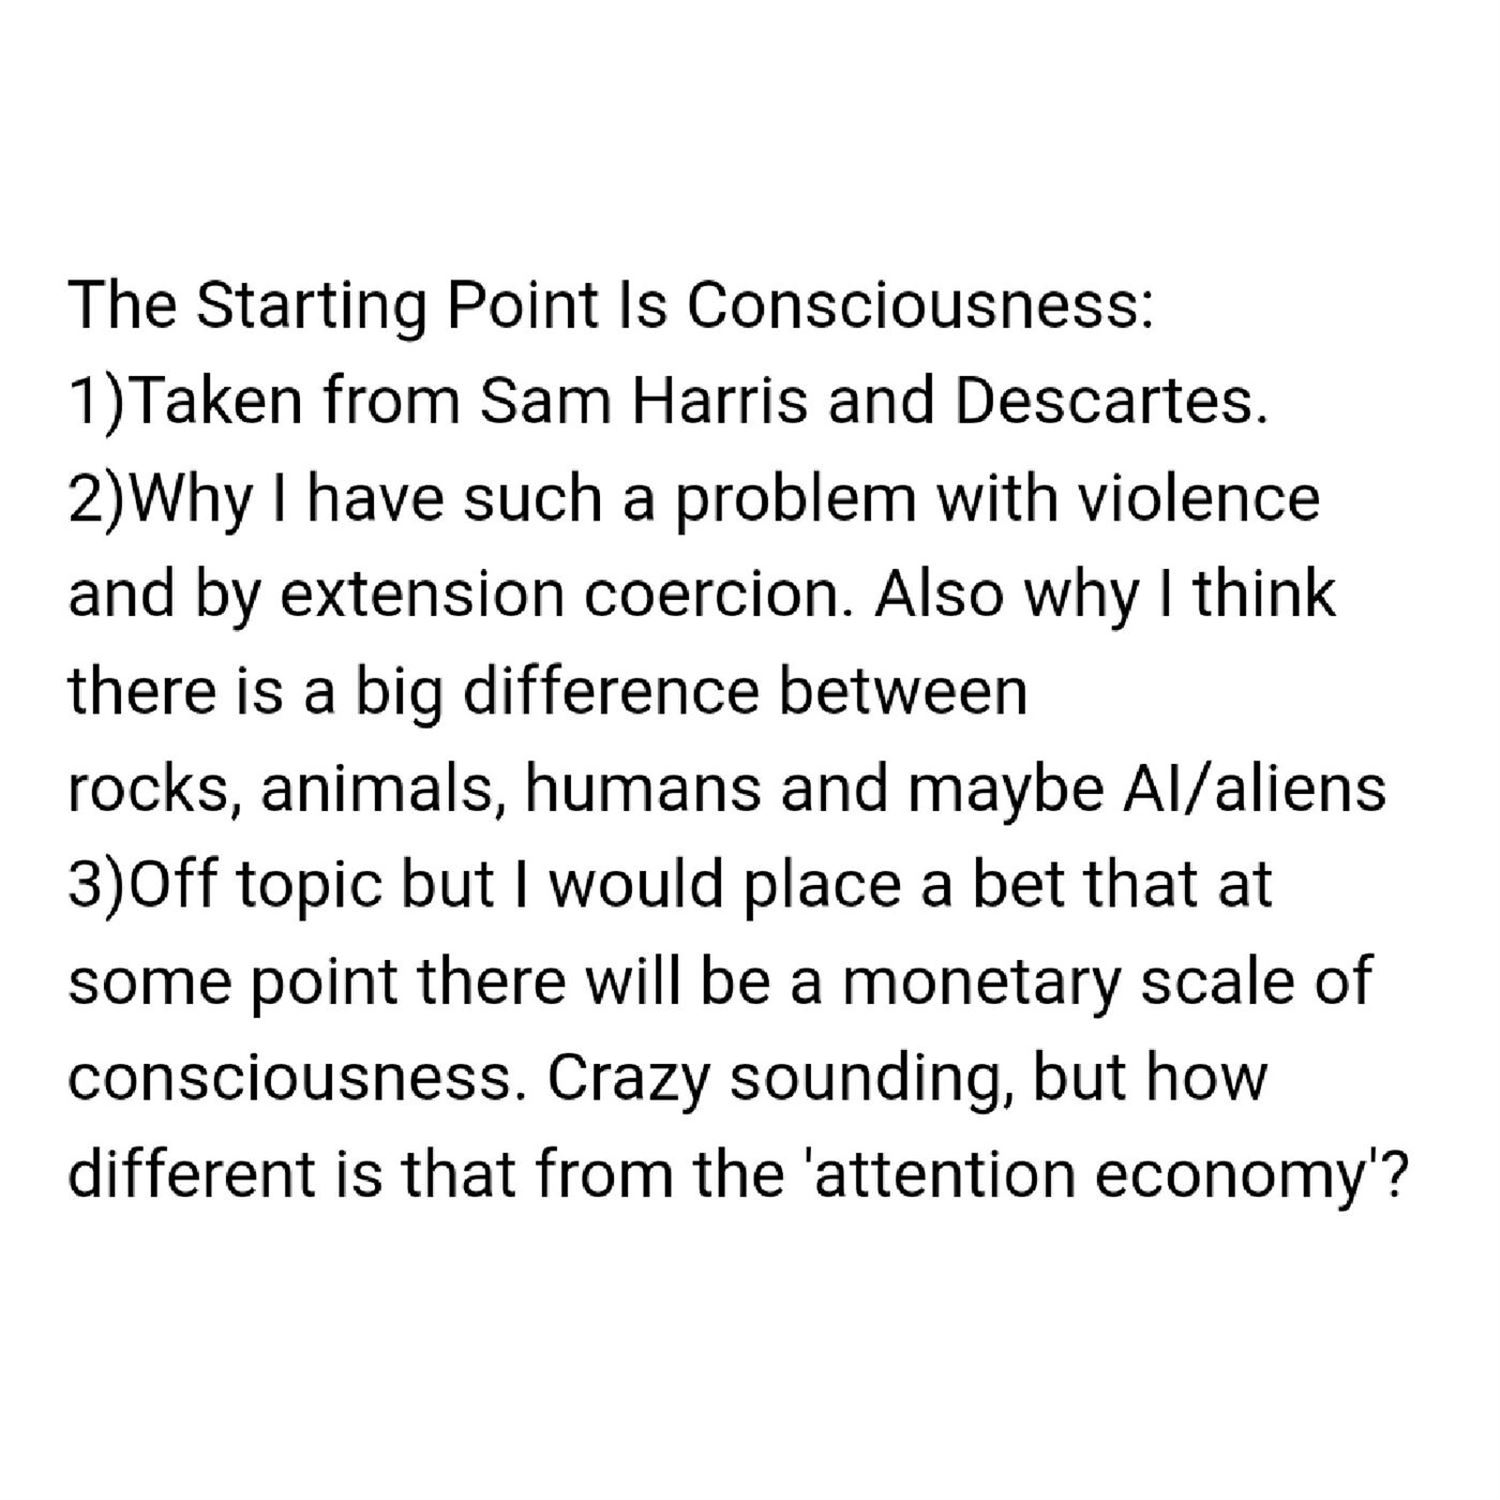 The starting point is consciousness